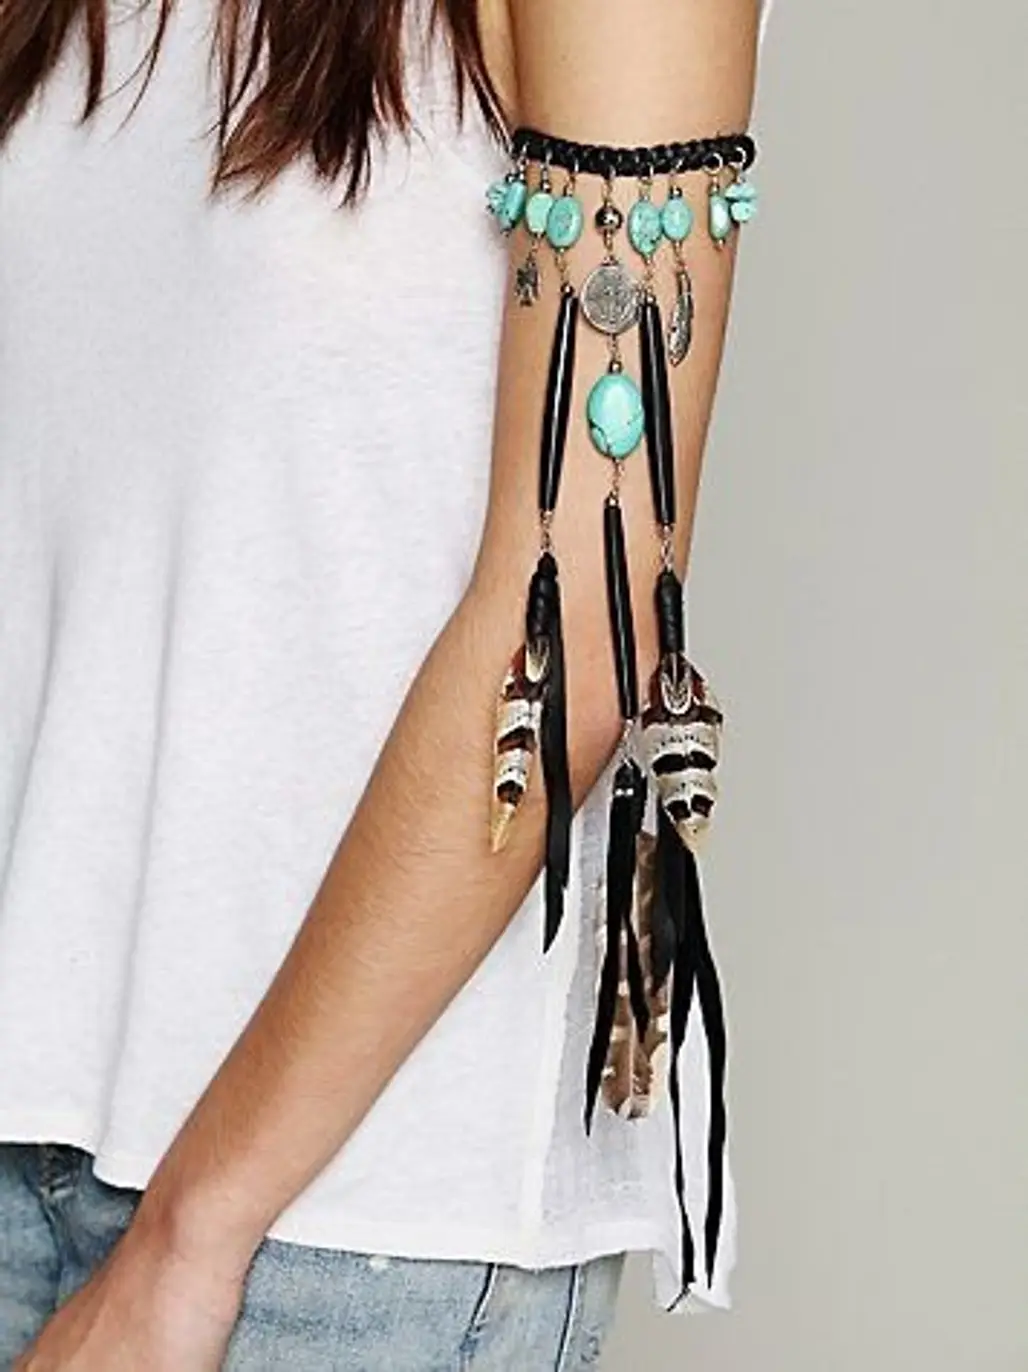 Braided Leather Wrap with Turquoise around Your Arm